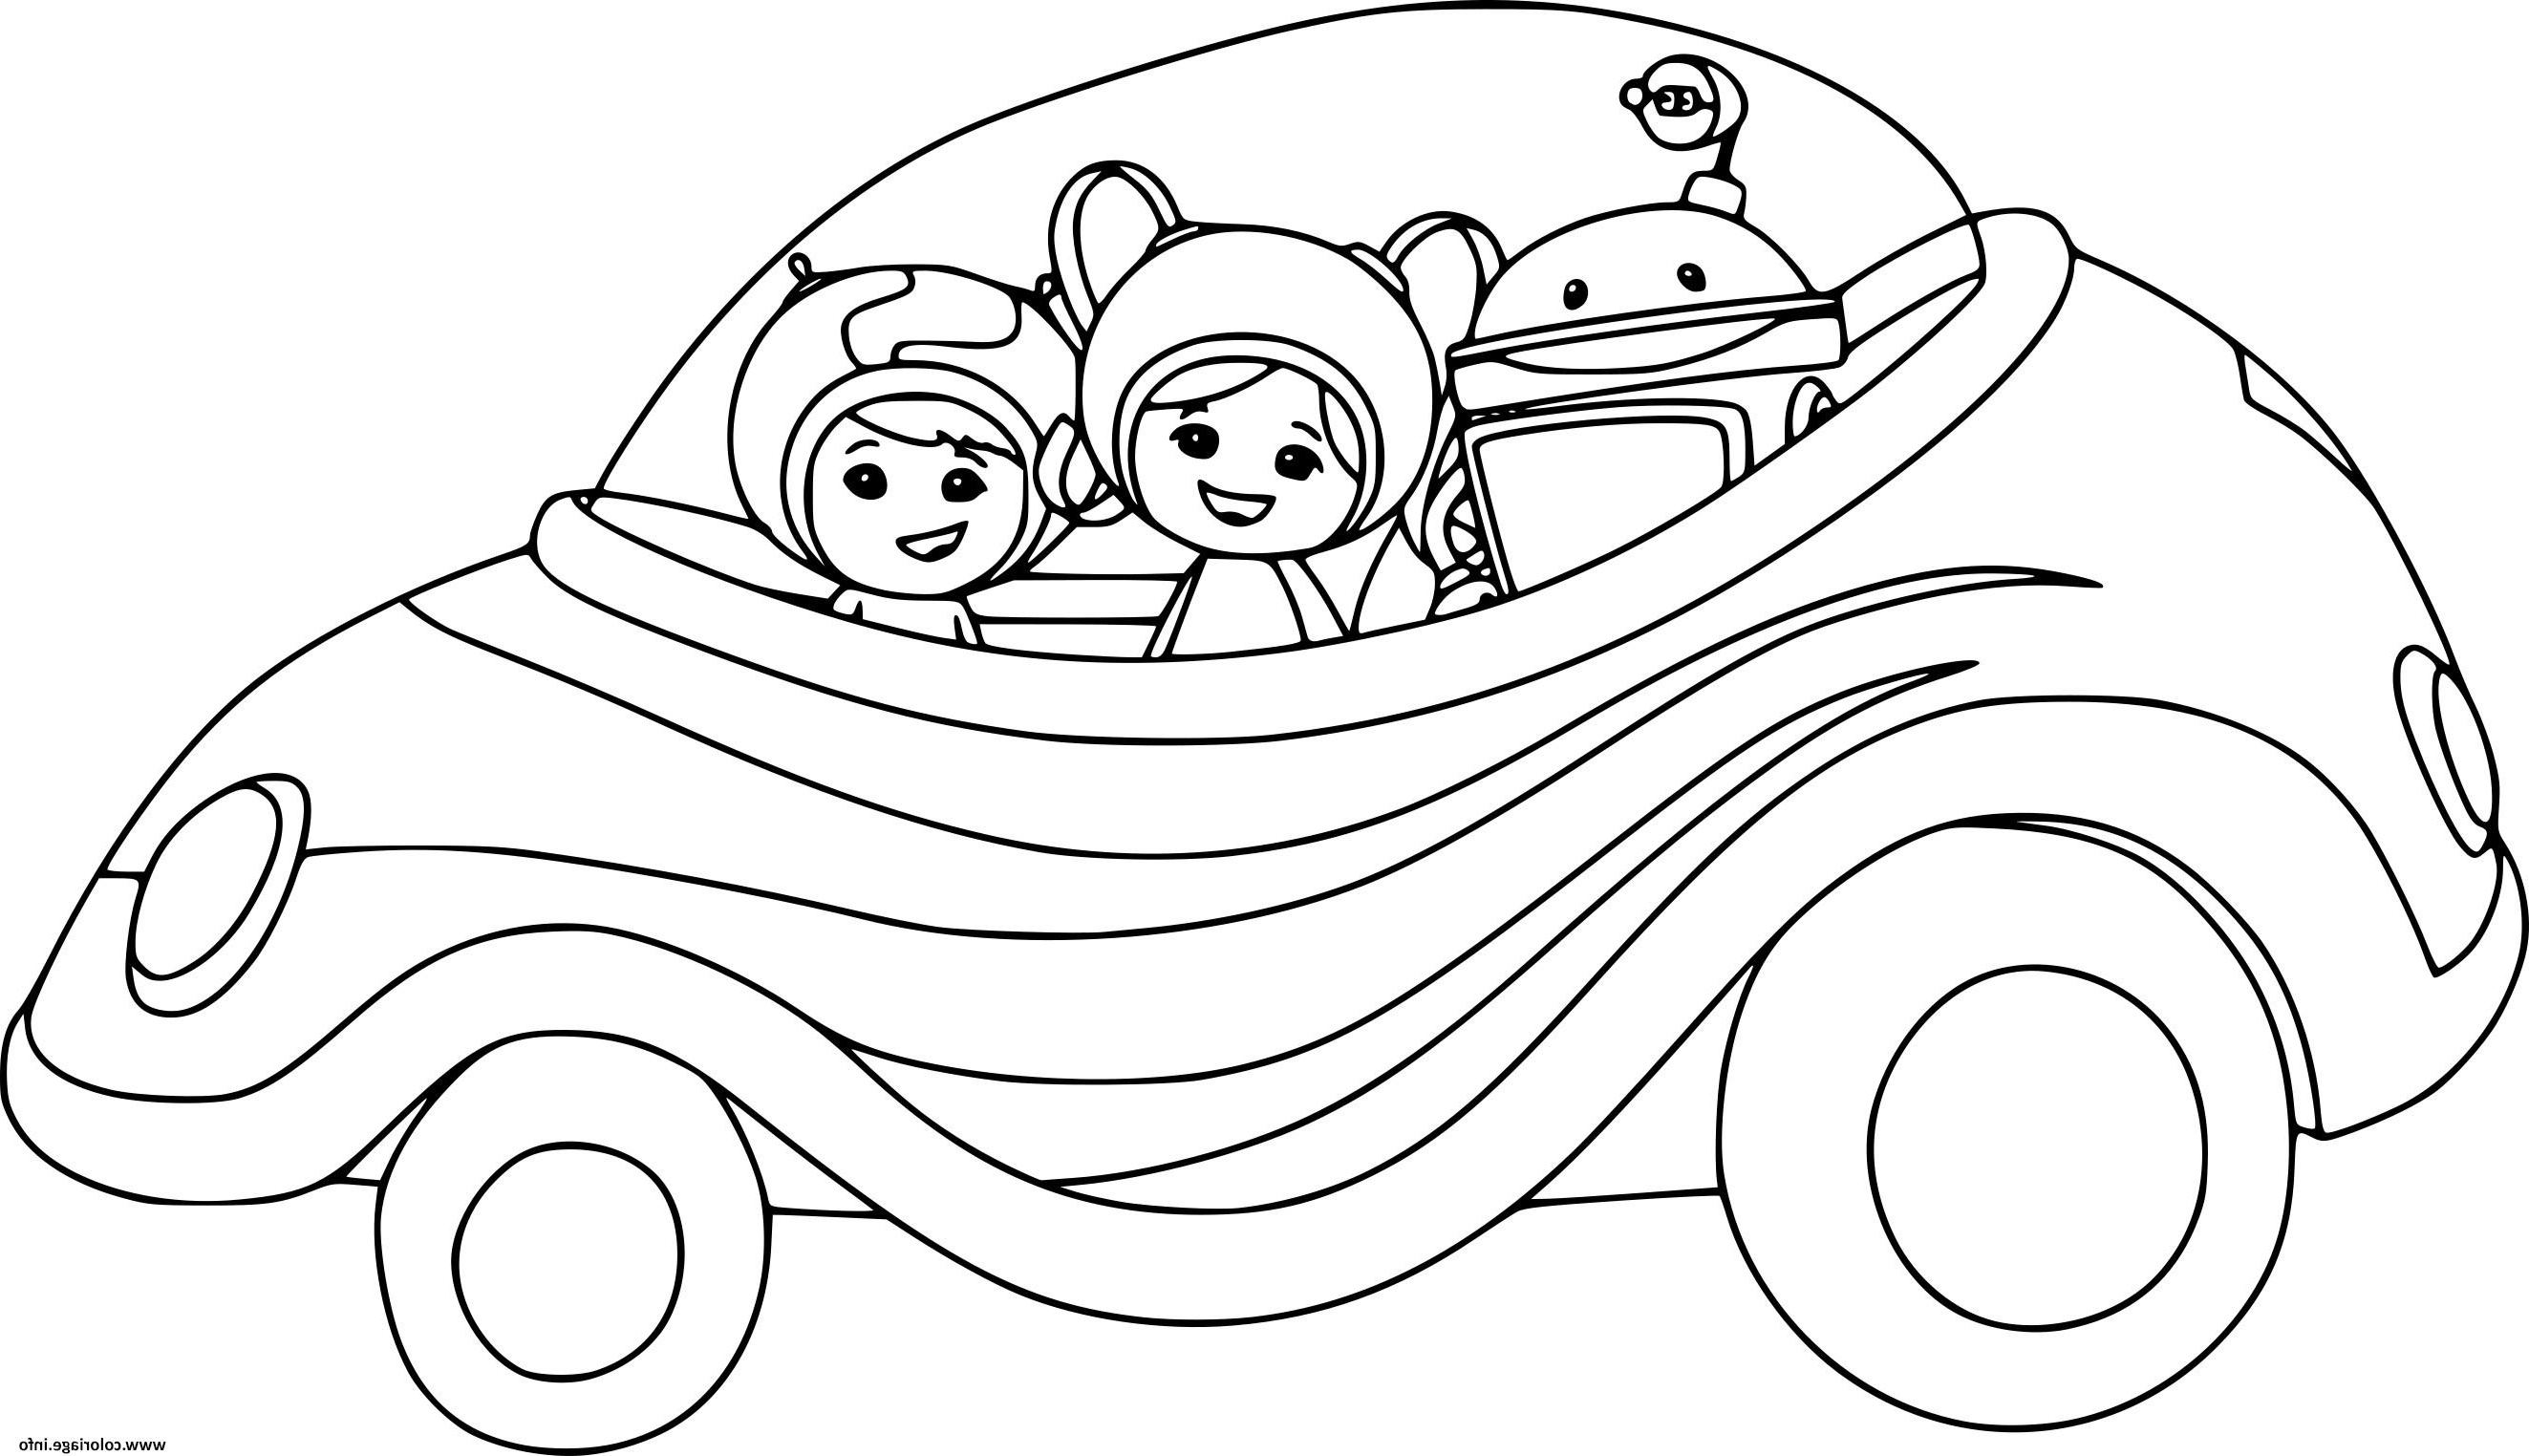 Umizoomi Coloriage Inspirant Collection Coloriage Umizoomi En Voiture Dessin